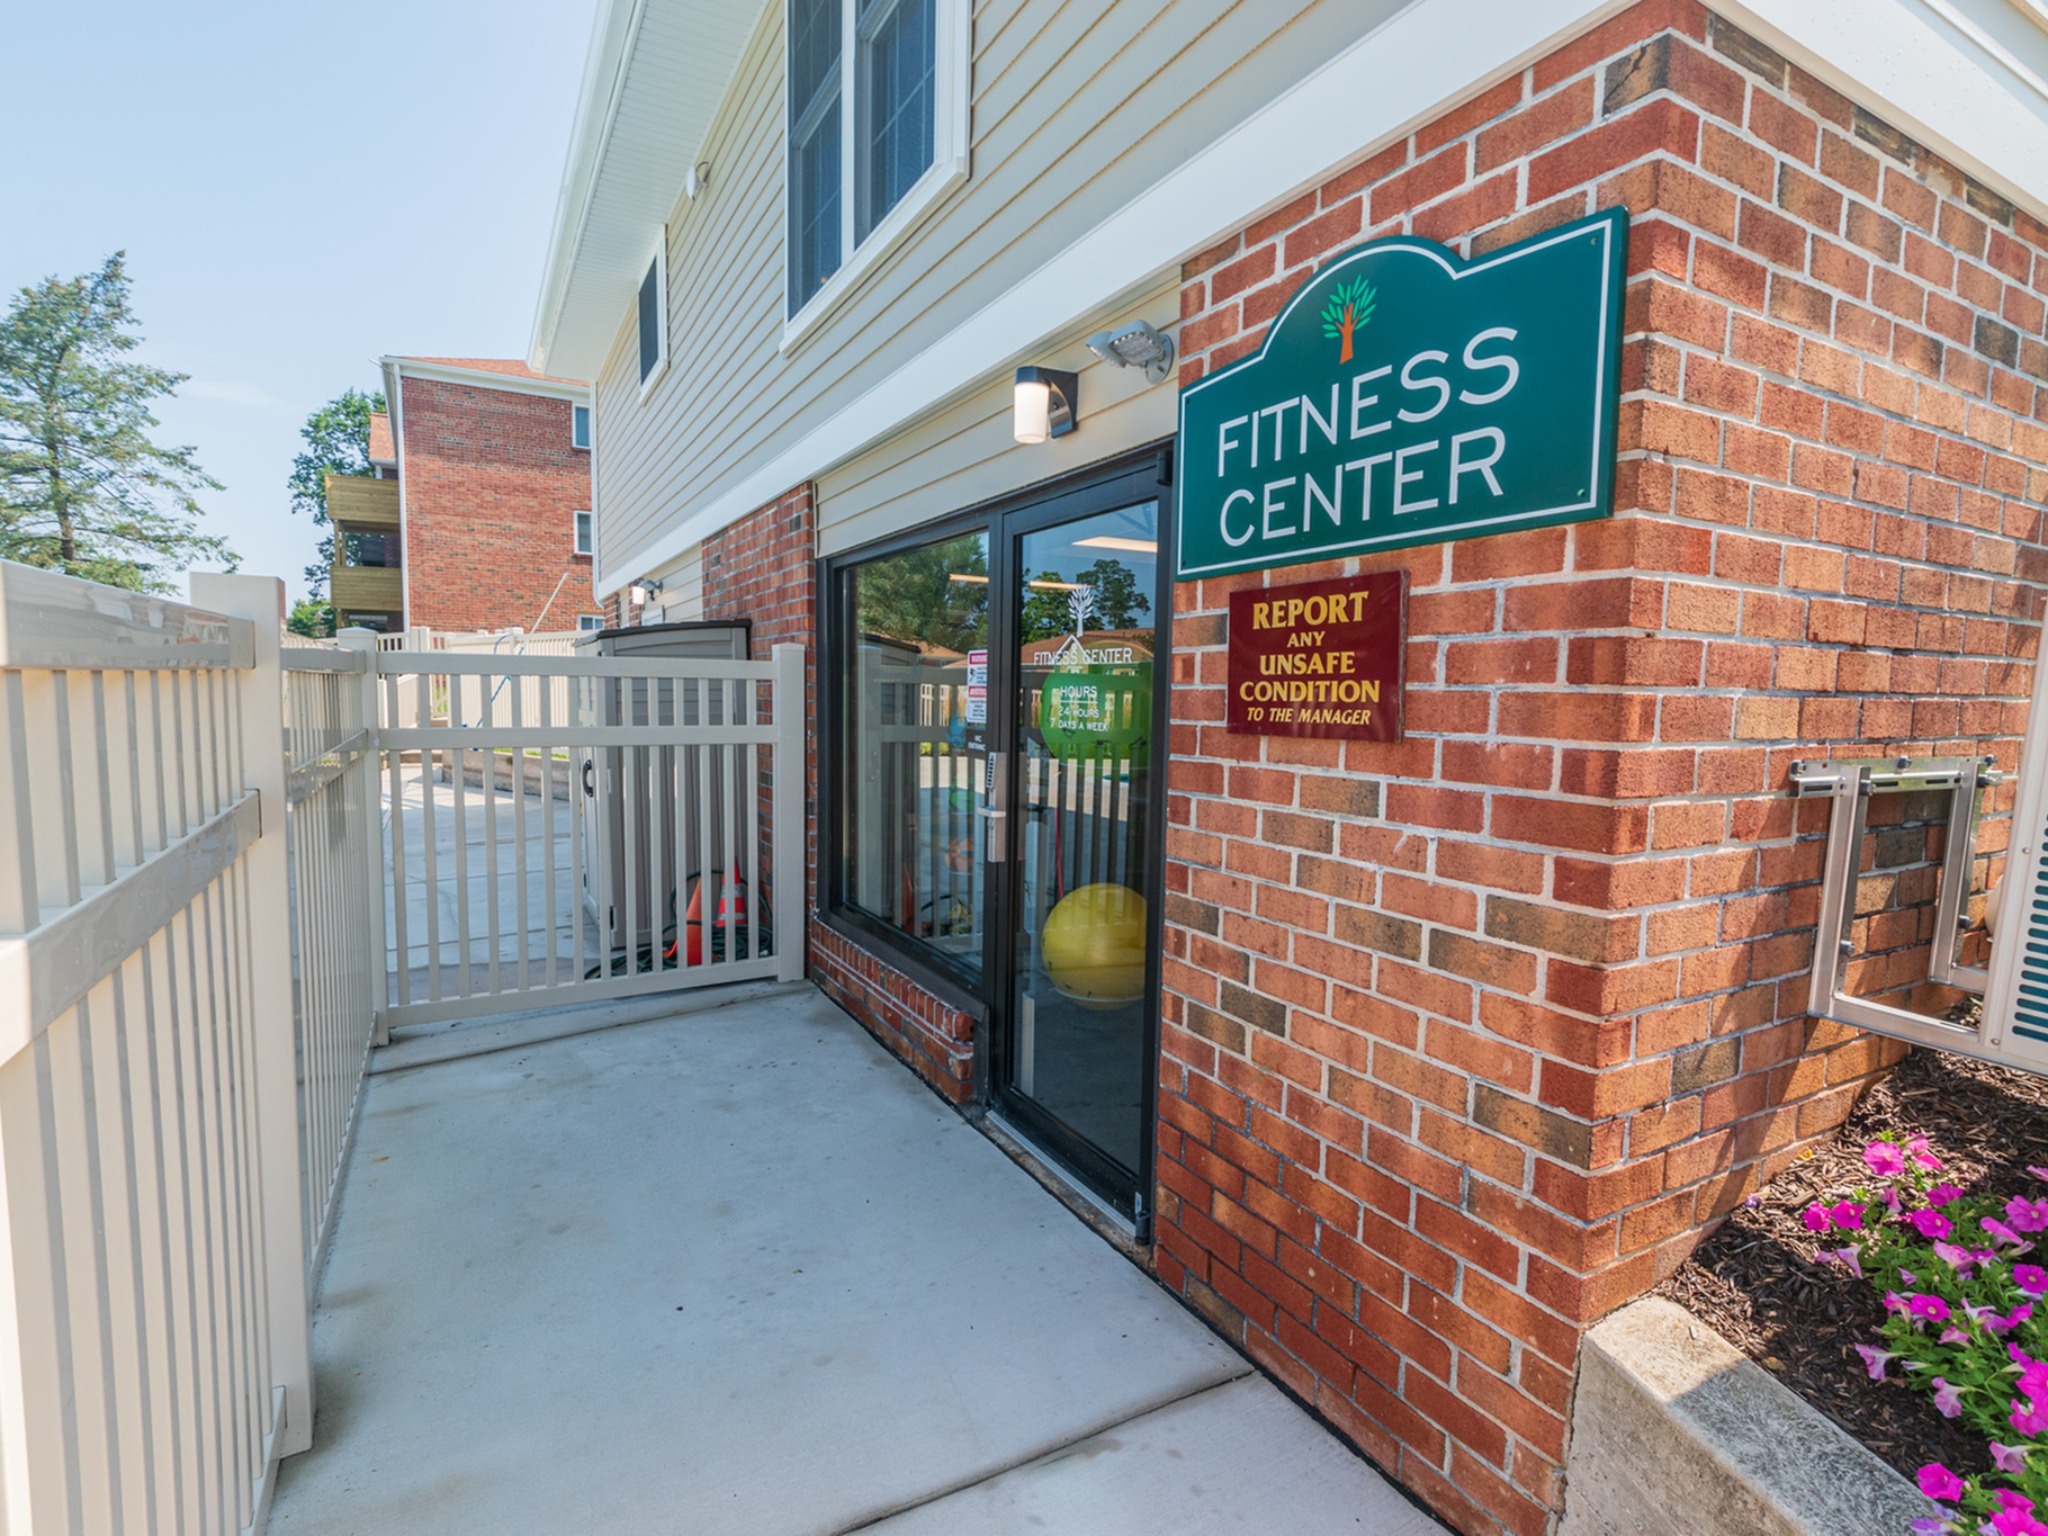 Entrance to fitness center, fitted with a paved walkway, and entrance